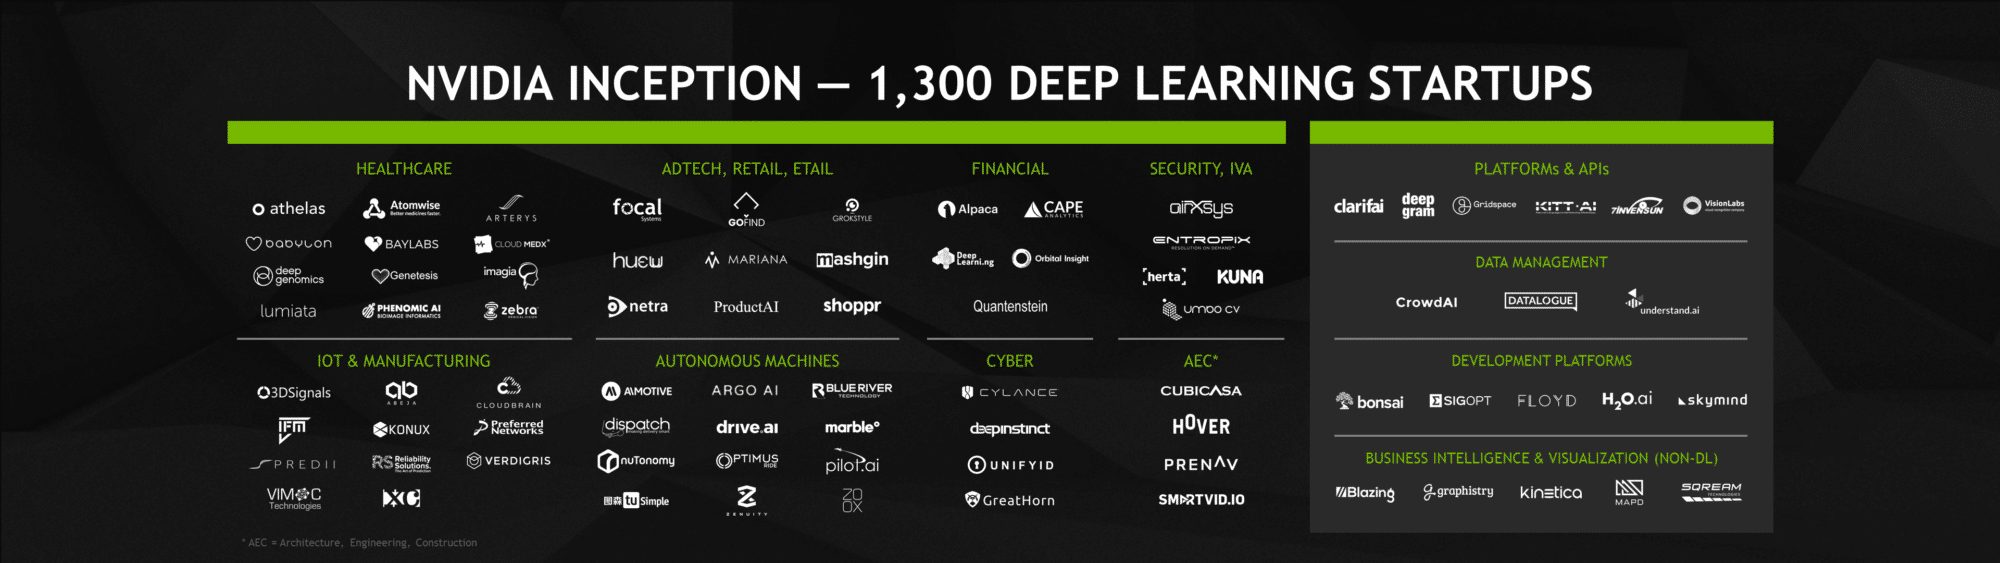 NVIDIA Deep Learning Startup Ecosystem